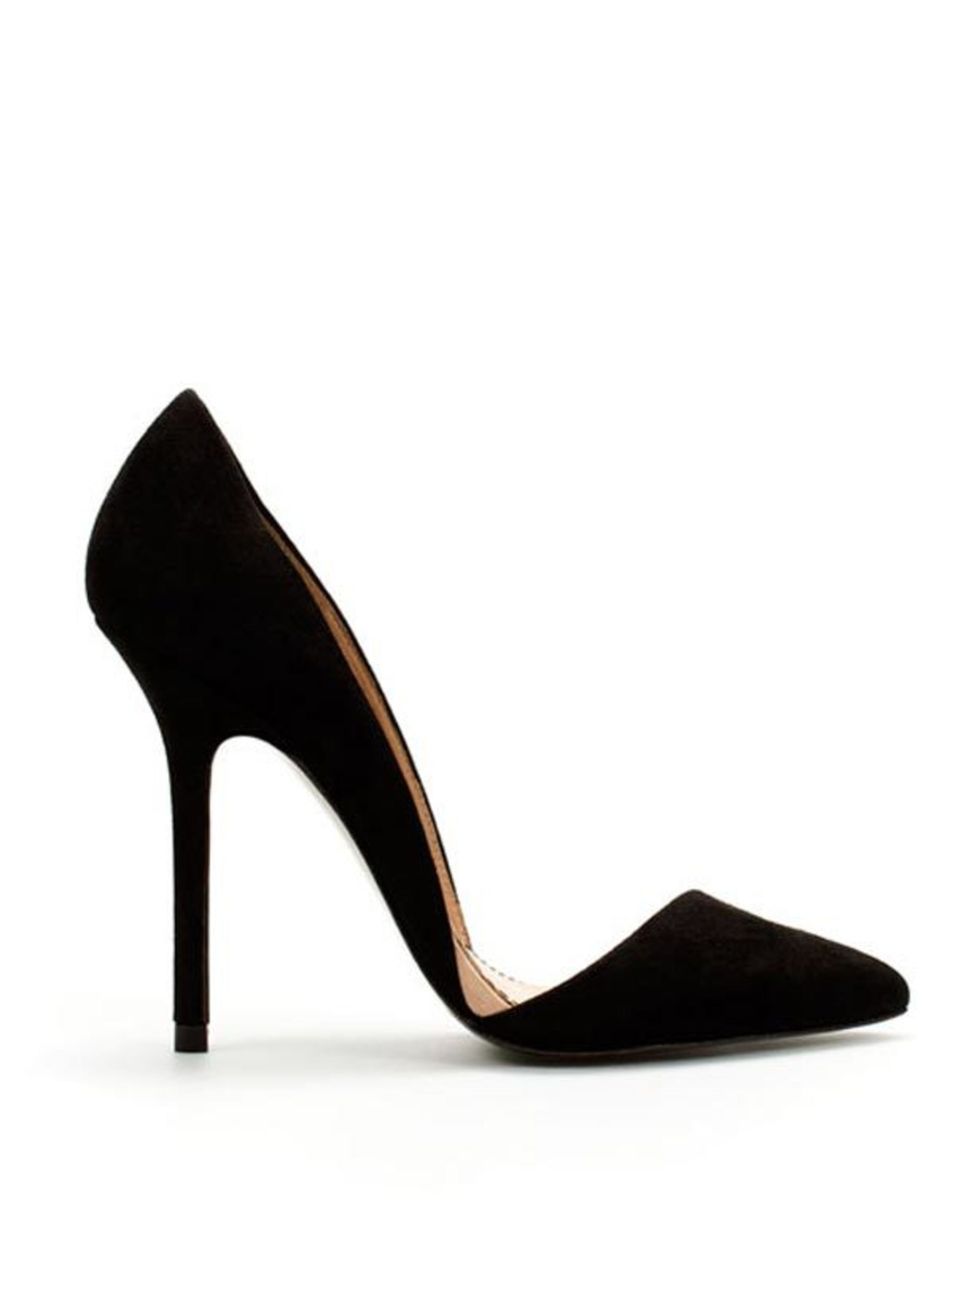 <p><a href="http://www.zara.com/webapp/wcs/stores/servlet/product/uk/en/zara-W2010-s/51187/271072/ASYMMETRIC%2BCOURT%2BSHOE"> </a></p><p>The sub zero temperatures have returned but the high street and online stores are offering the perfect distraction wit